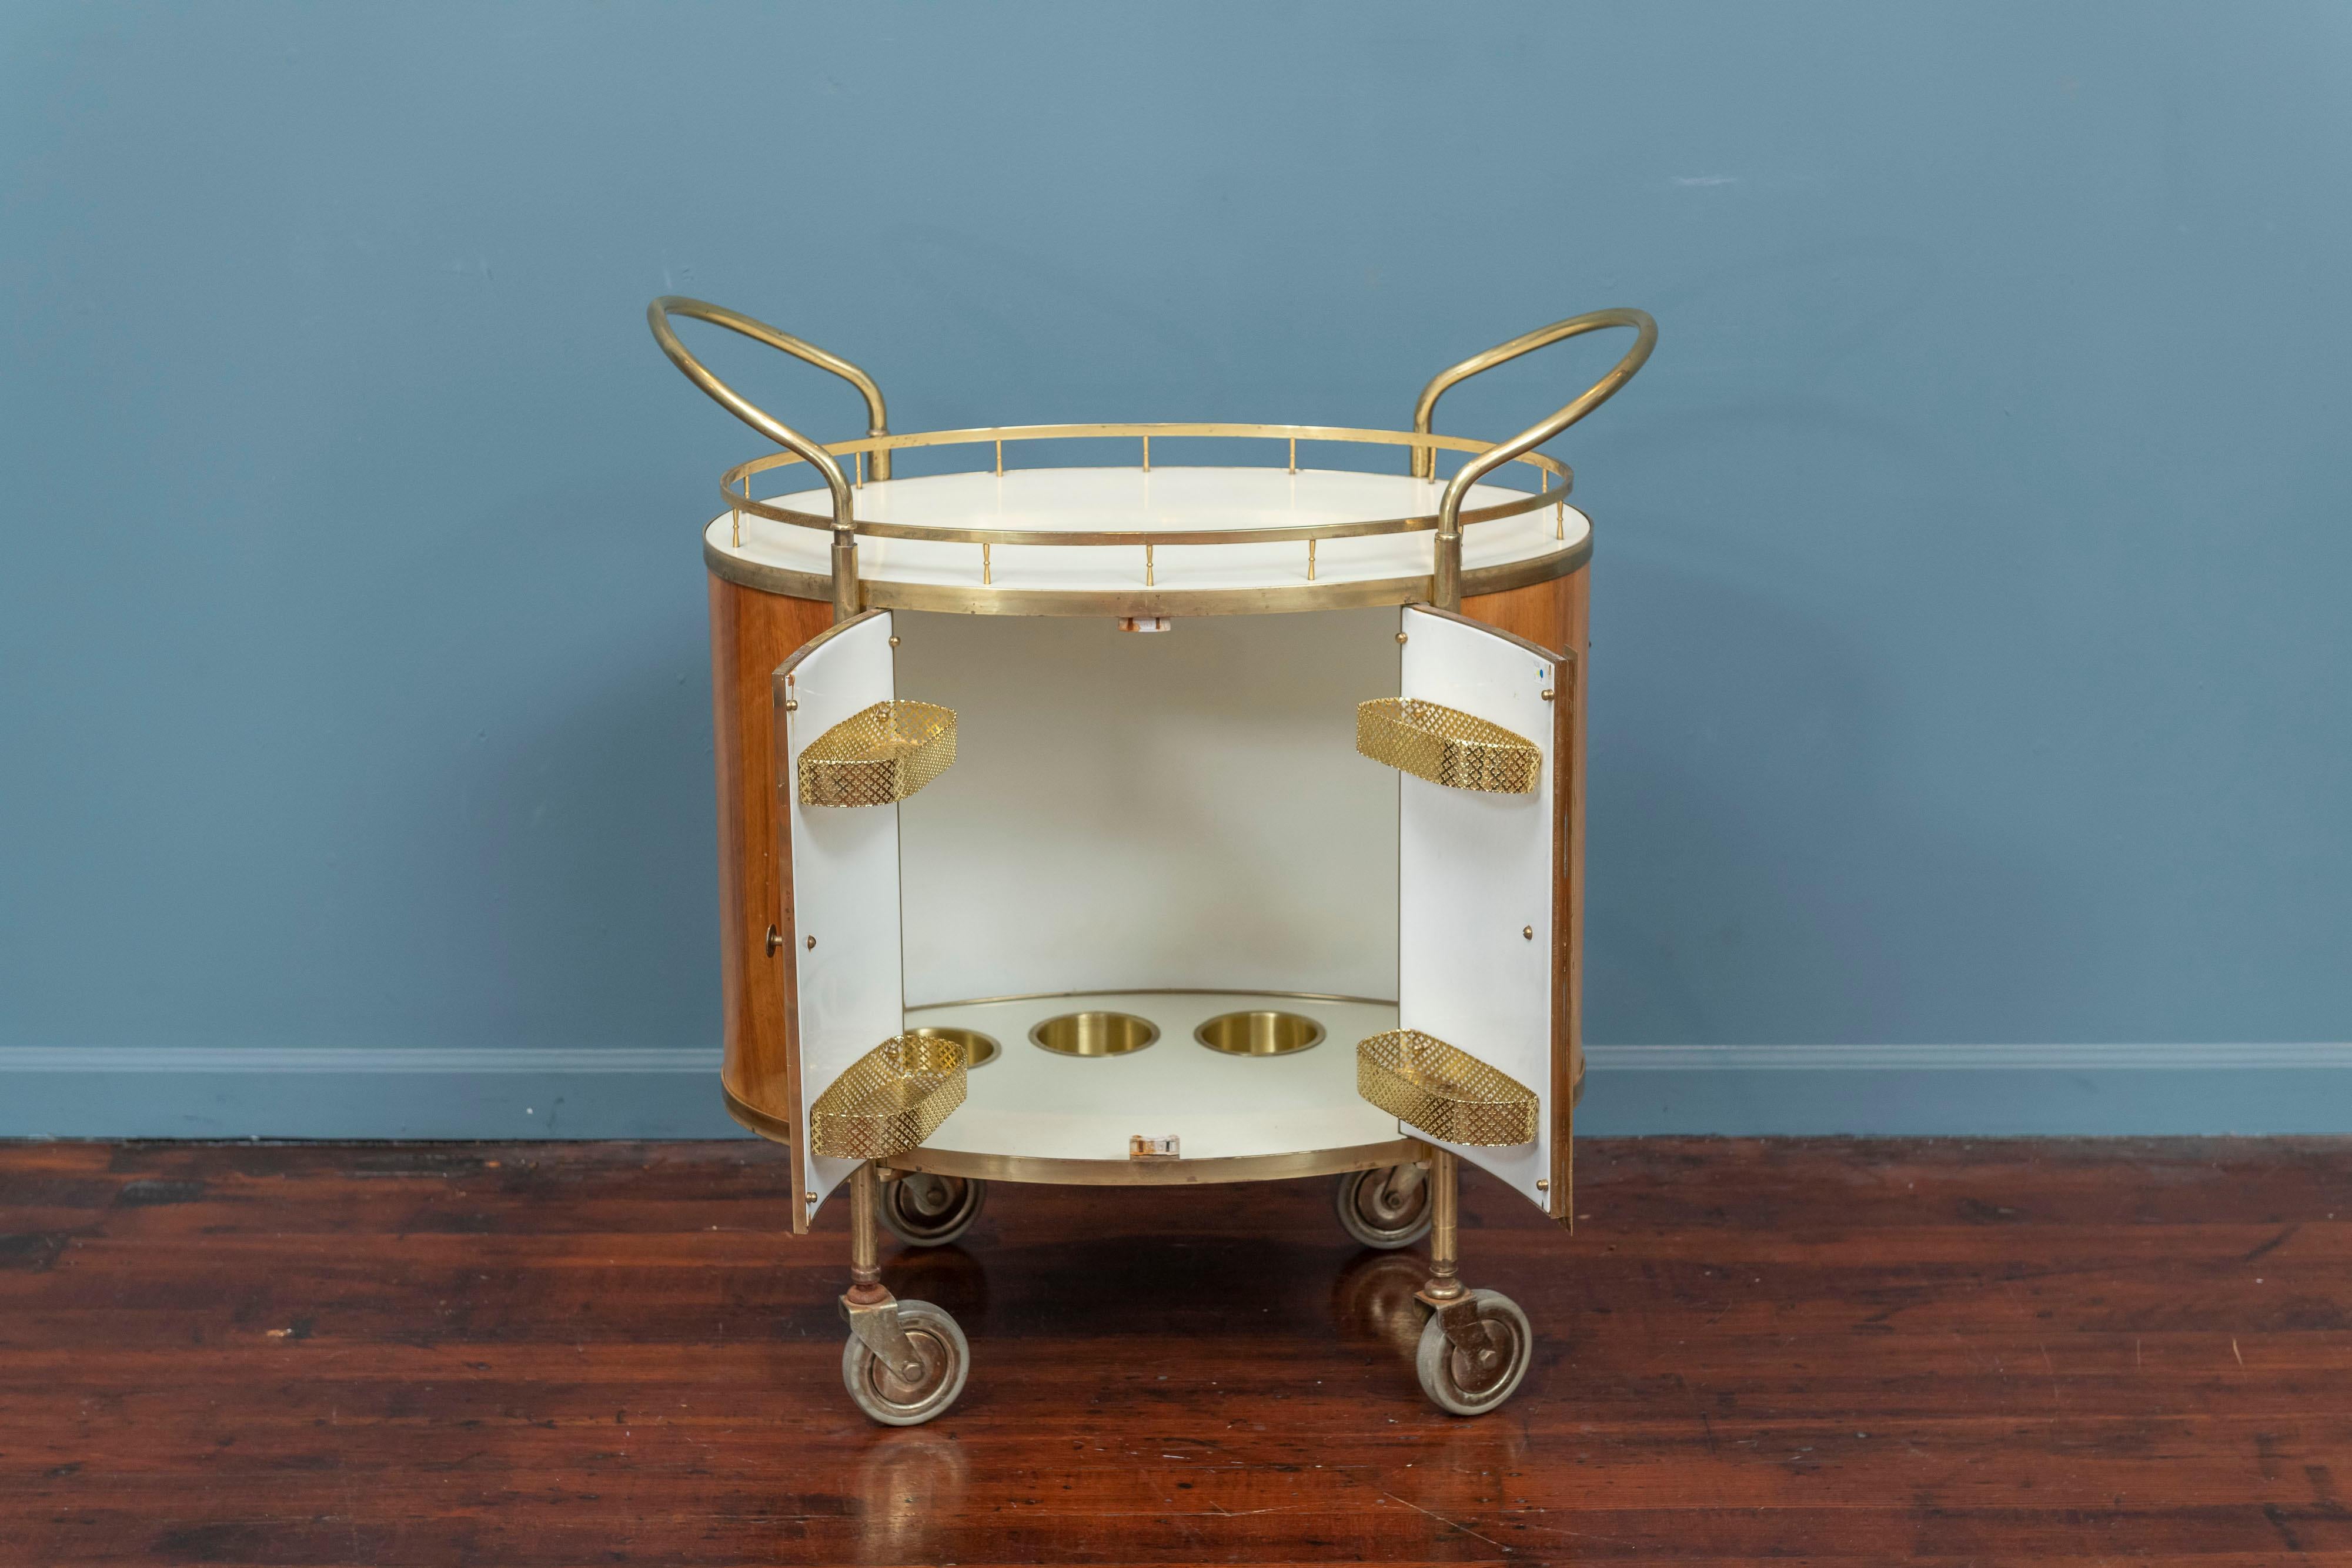 Mid-Century Modern Italian bar cart. Fun and clever designed bar cart or trolley with a removable serving tray, fitted interior and plenty of storage for bottles and serving accessories.